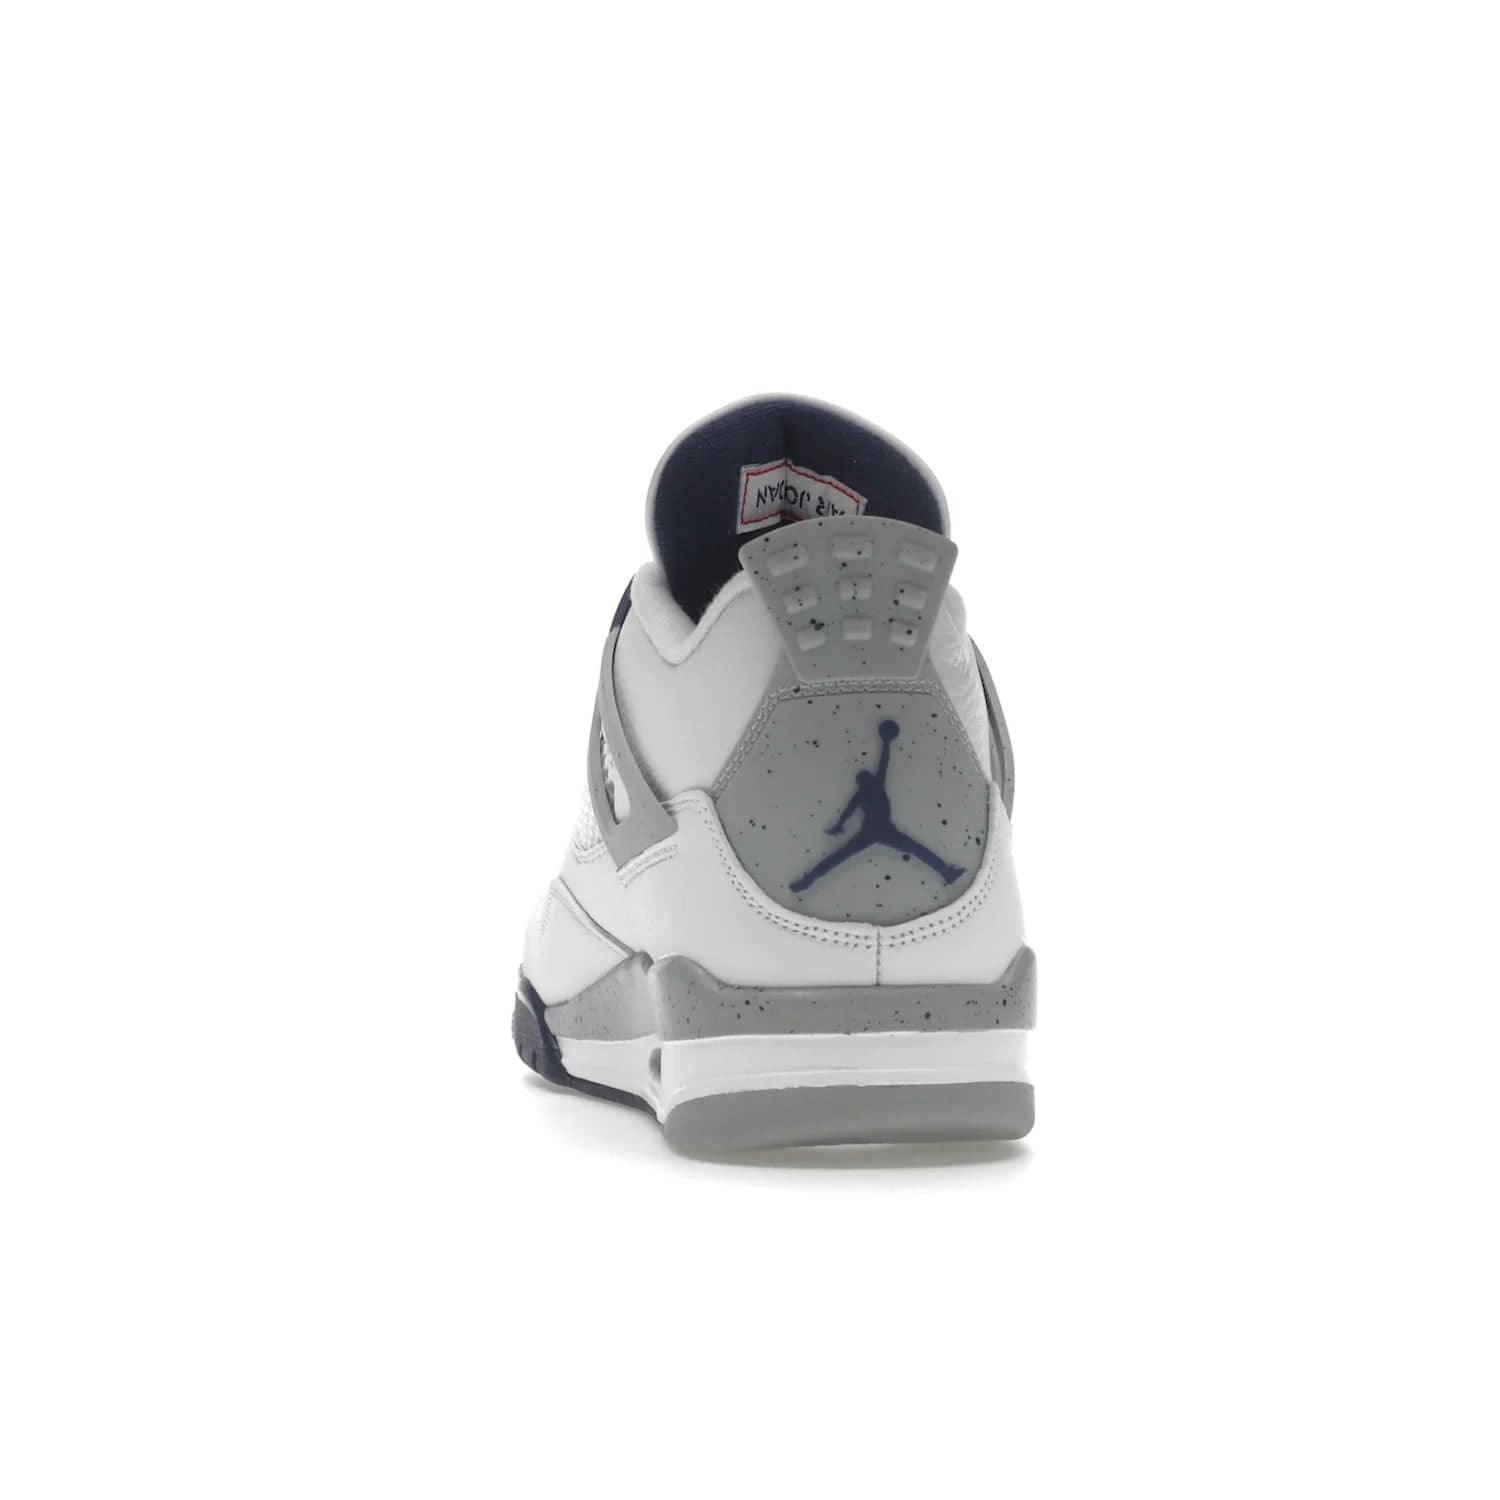 Jordan 4 Retro Midnight Navy - Image 27 - Only at www.BallersClubKickz.com - Shop the Air Jordan Retro 4 White Midnight Navy. Stand out with a classic white leather upper, black support wings, midnight navy eyelets, and Crimson Jumpman tongue tag. Unbeatable comfort with two-tone polyurethane midsole with encapsulated Air technology. Get yours before October 29th, 2022.